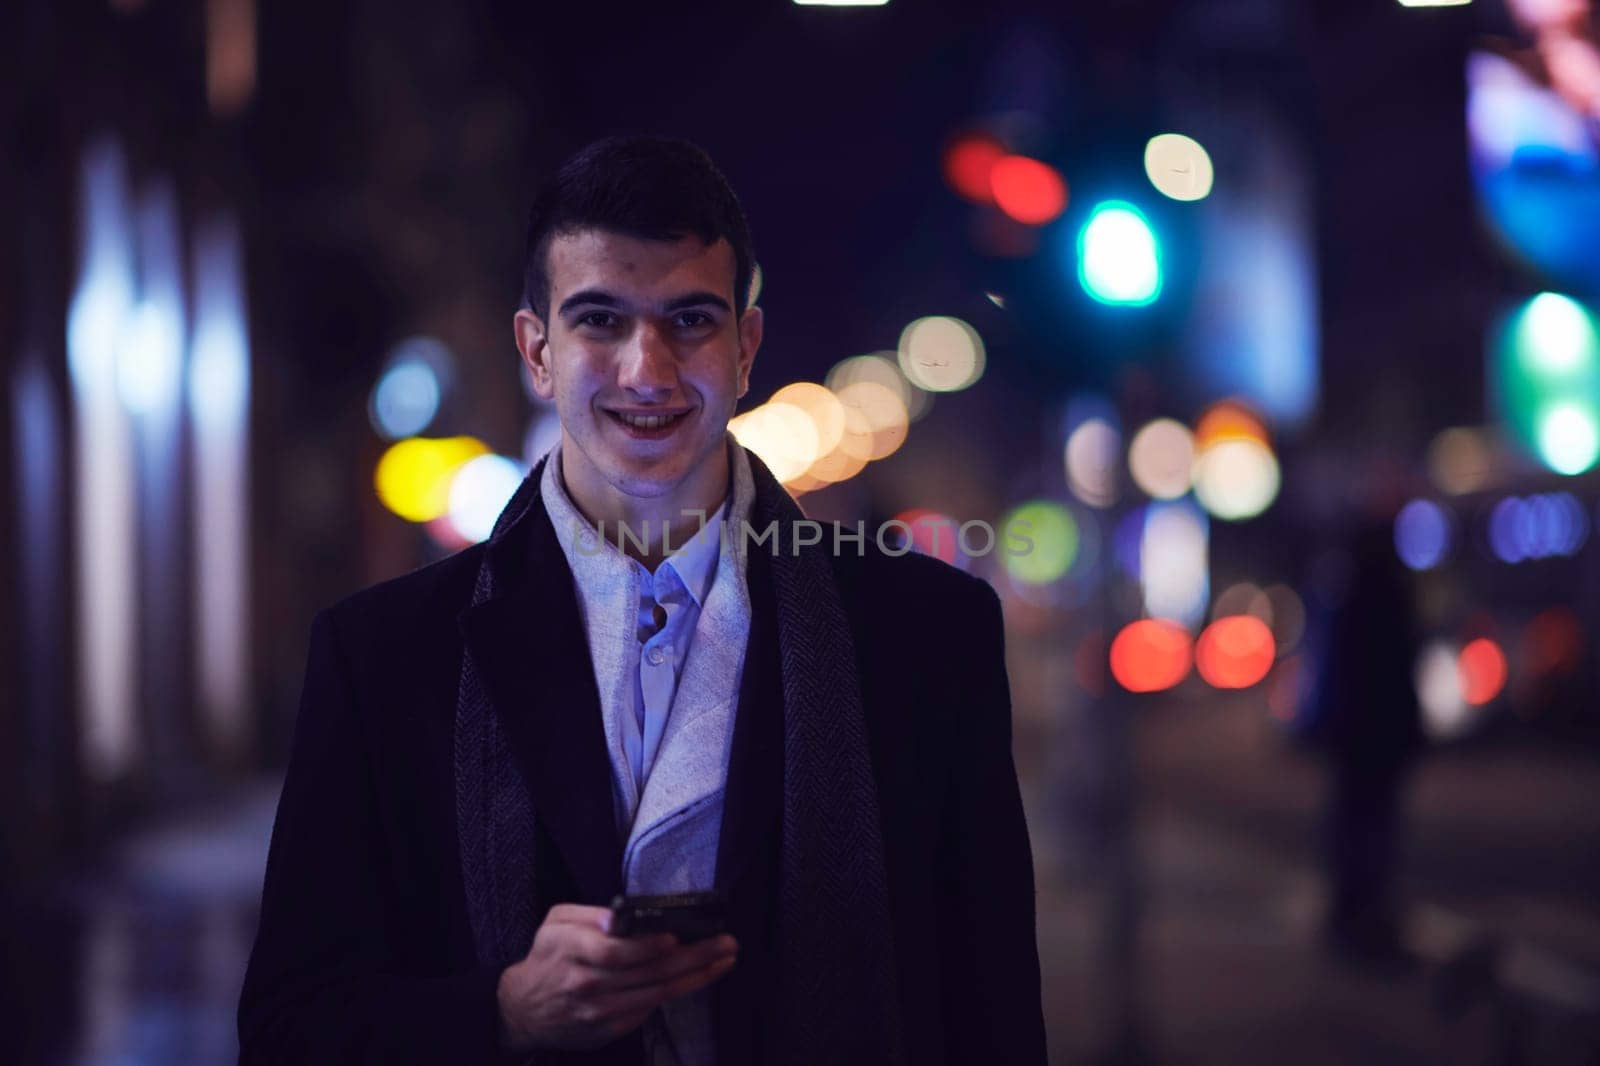 Smiling Meedle Eastern man walking down street near modern office building, freelancer businessman looking away holding mobile phone on busy city street at night